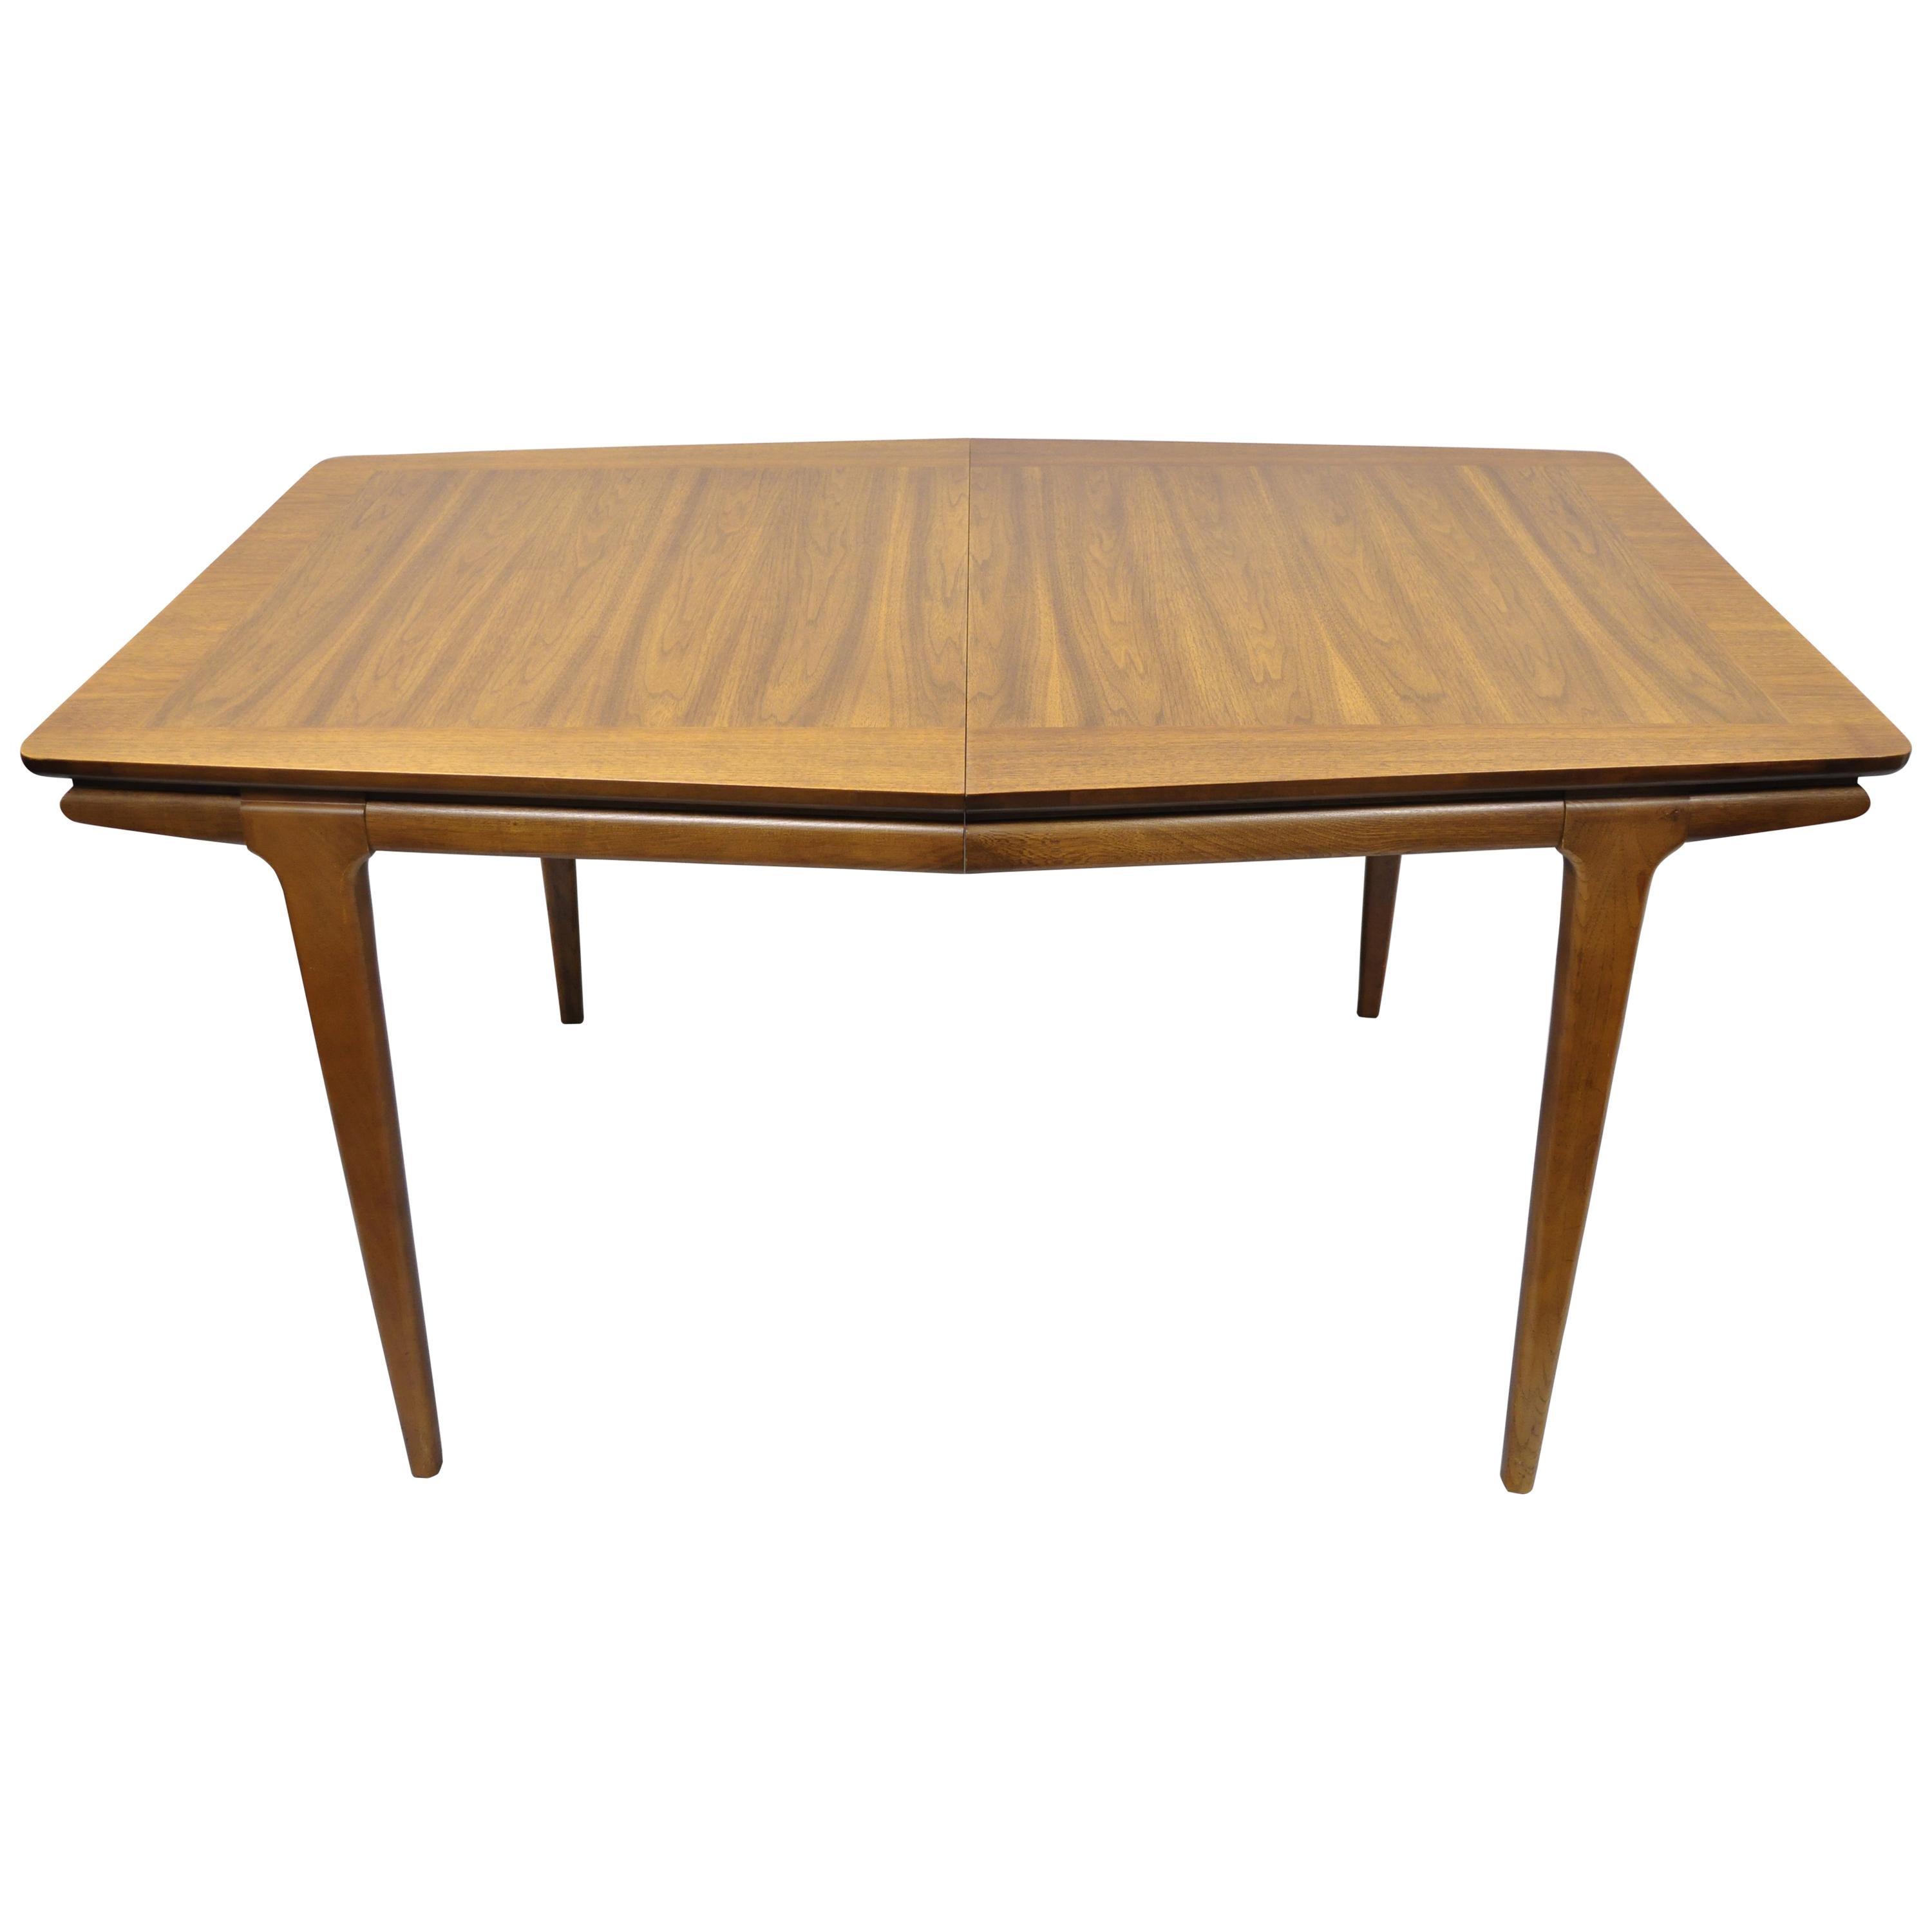 Mid-Century Modern Danish Walnut Sculpted Edge Dining Table with 1 Leaf